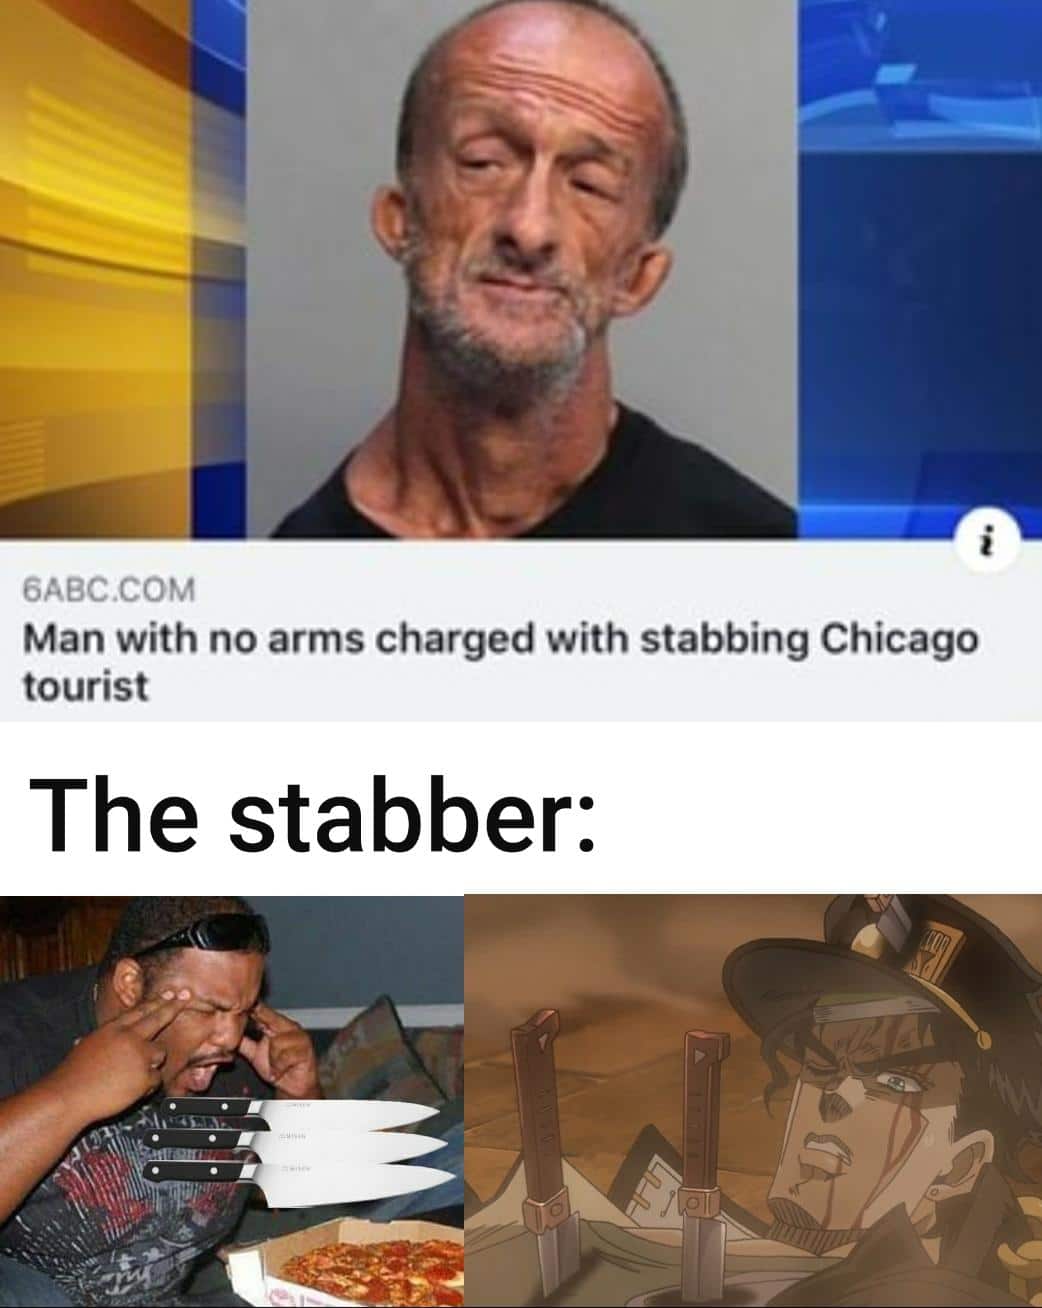 Funny, Zabuza, Mike, Florida, This Is Patrick, DIO other memes Funny, Zabuza, Mike, Florida, This Is Patrick, DIO text: 6ABC.COM Man with no arms charged with stabbing Chicago tourist The stabber: 